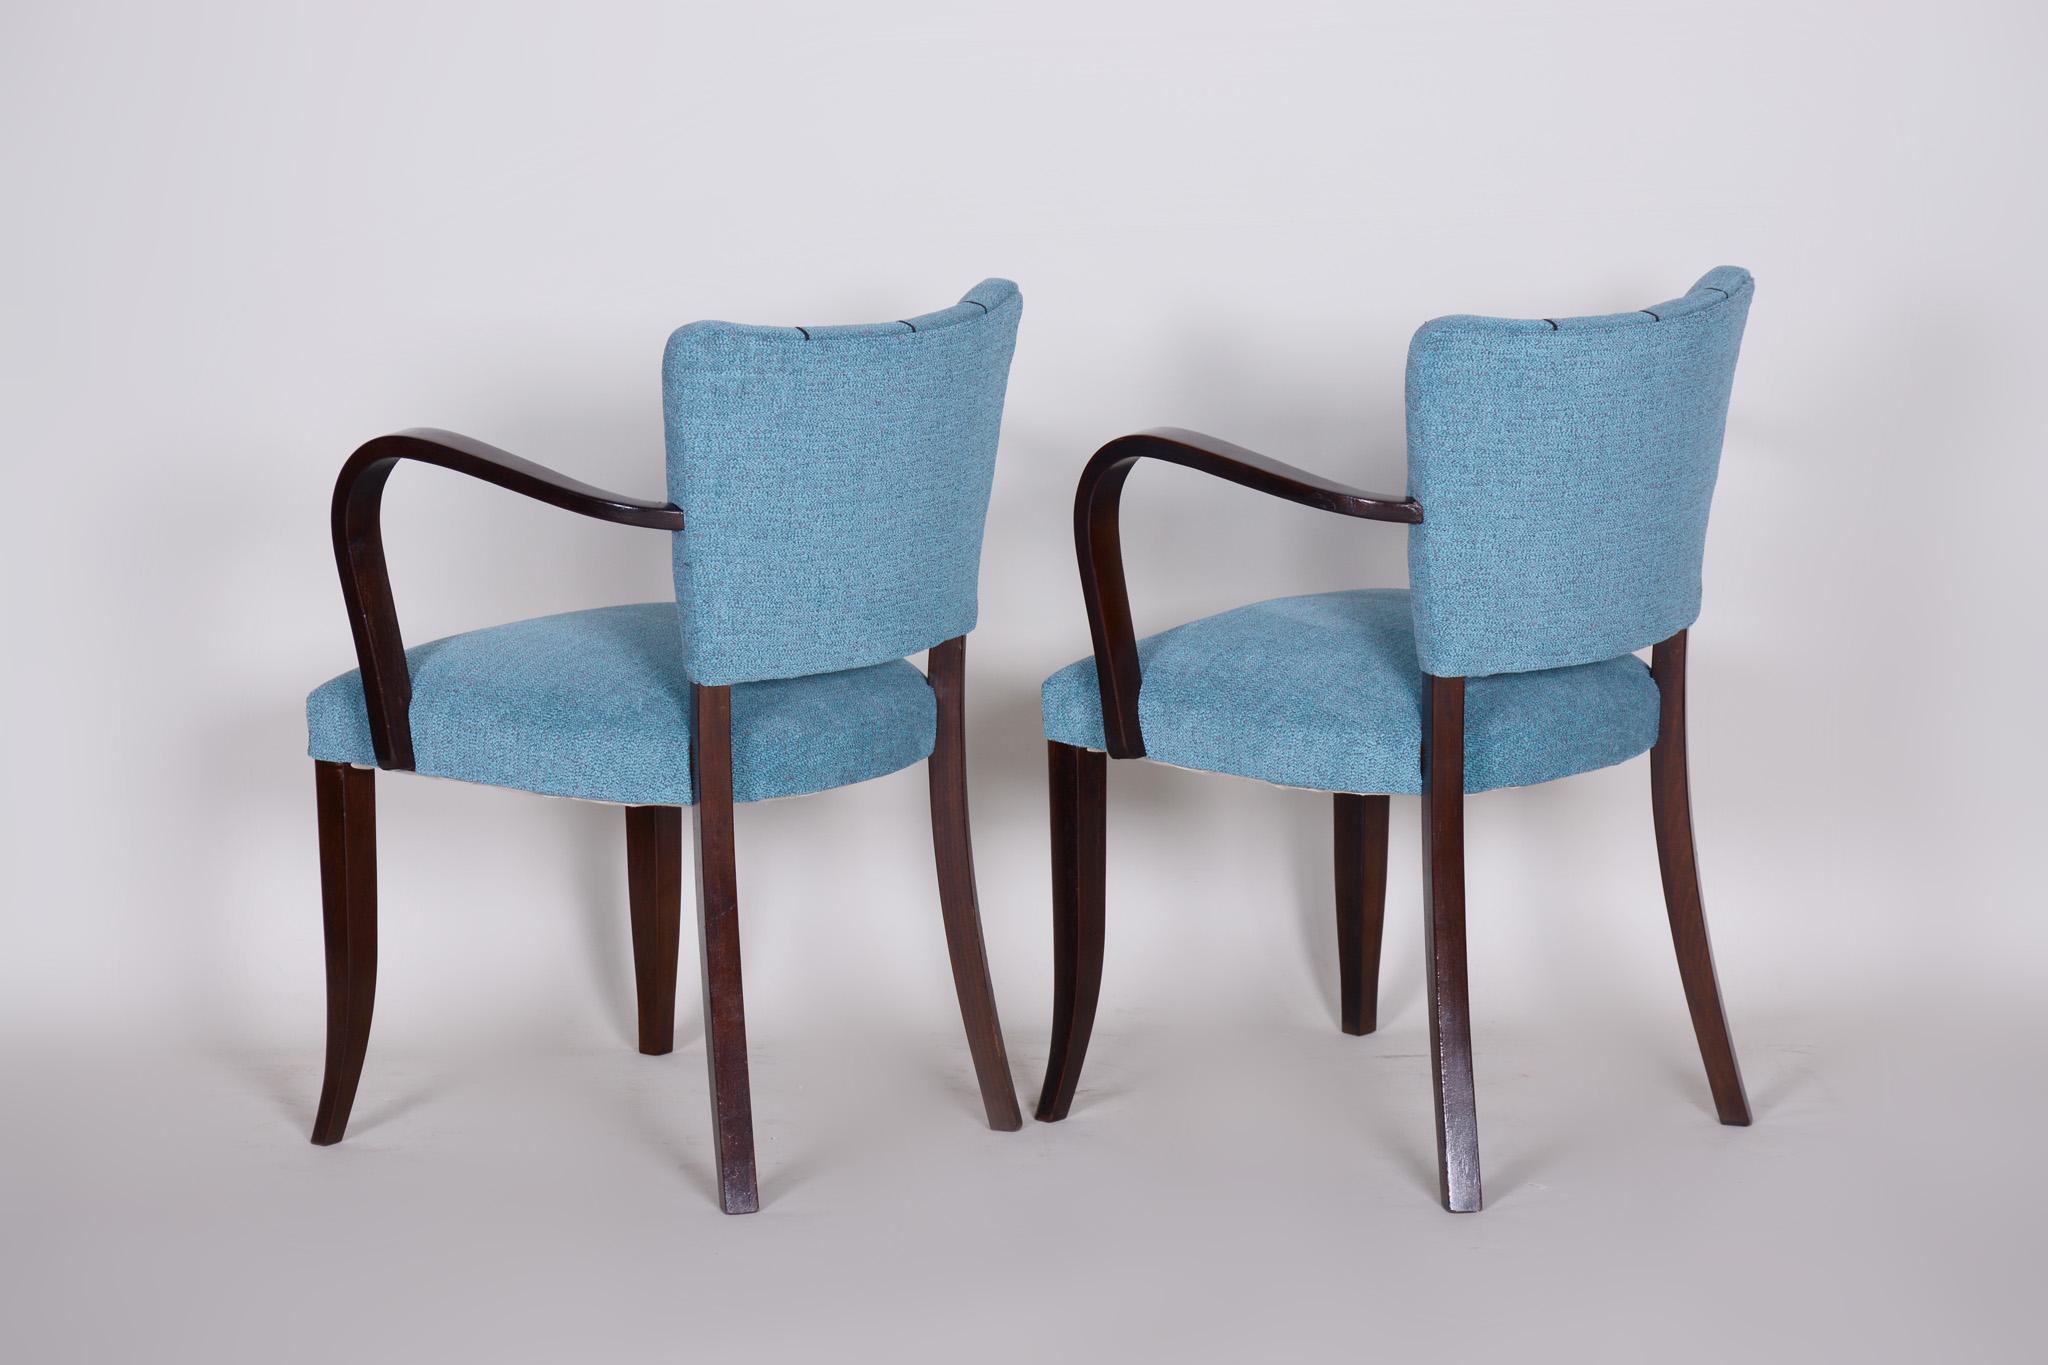 20th Century Pair of Restored Art Deco Blue Oak Armchairs, 1930s, France, New Upholstery